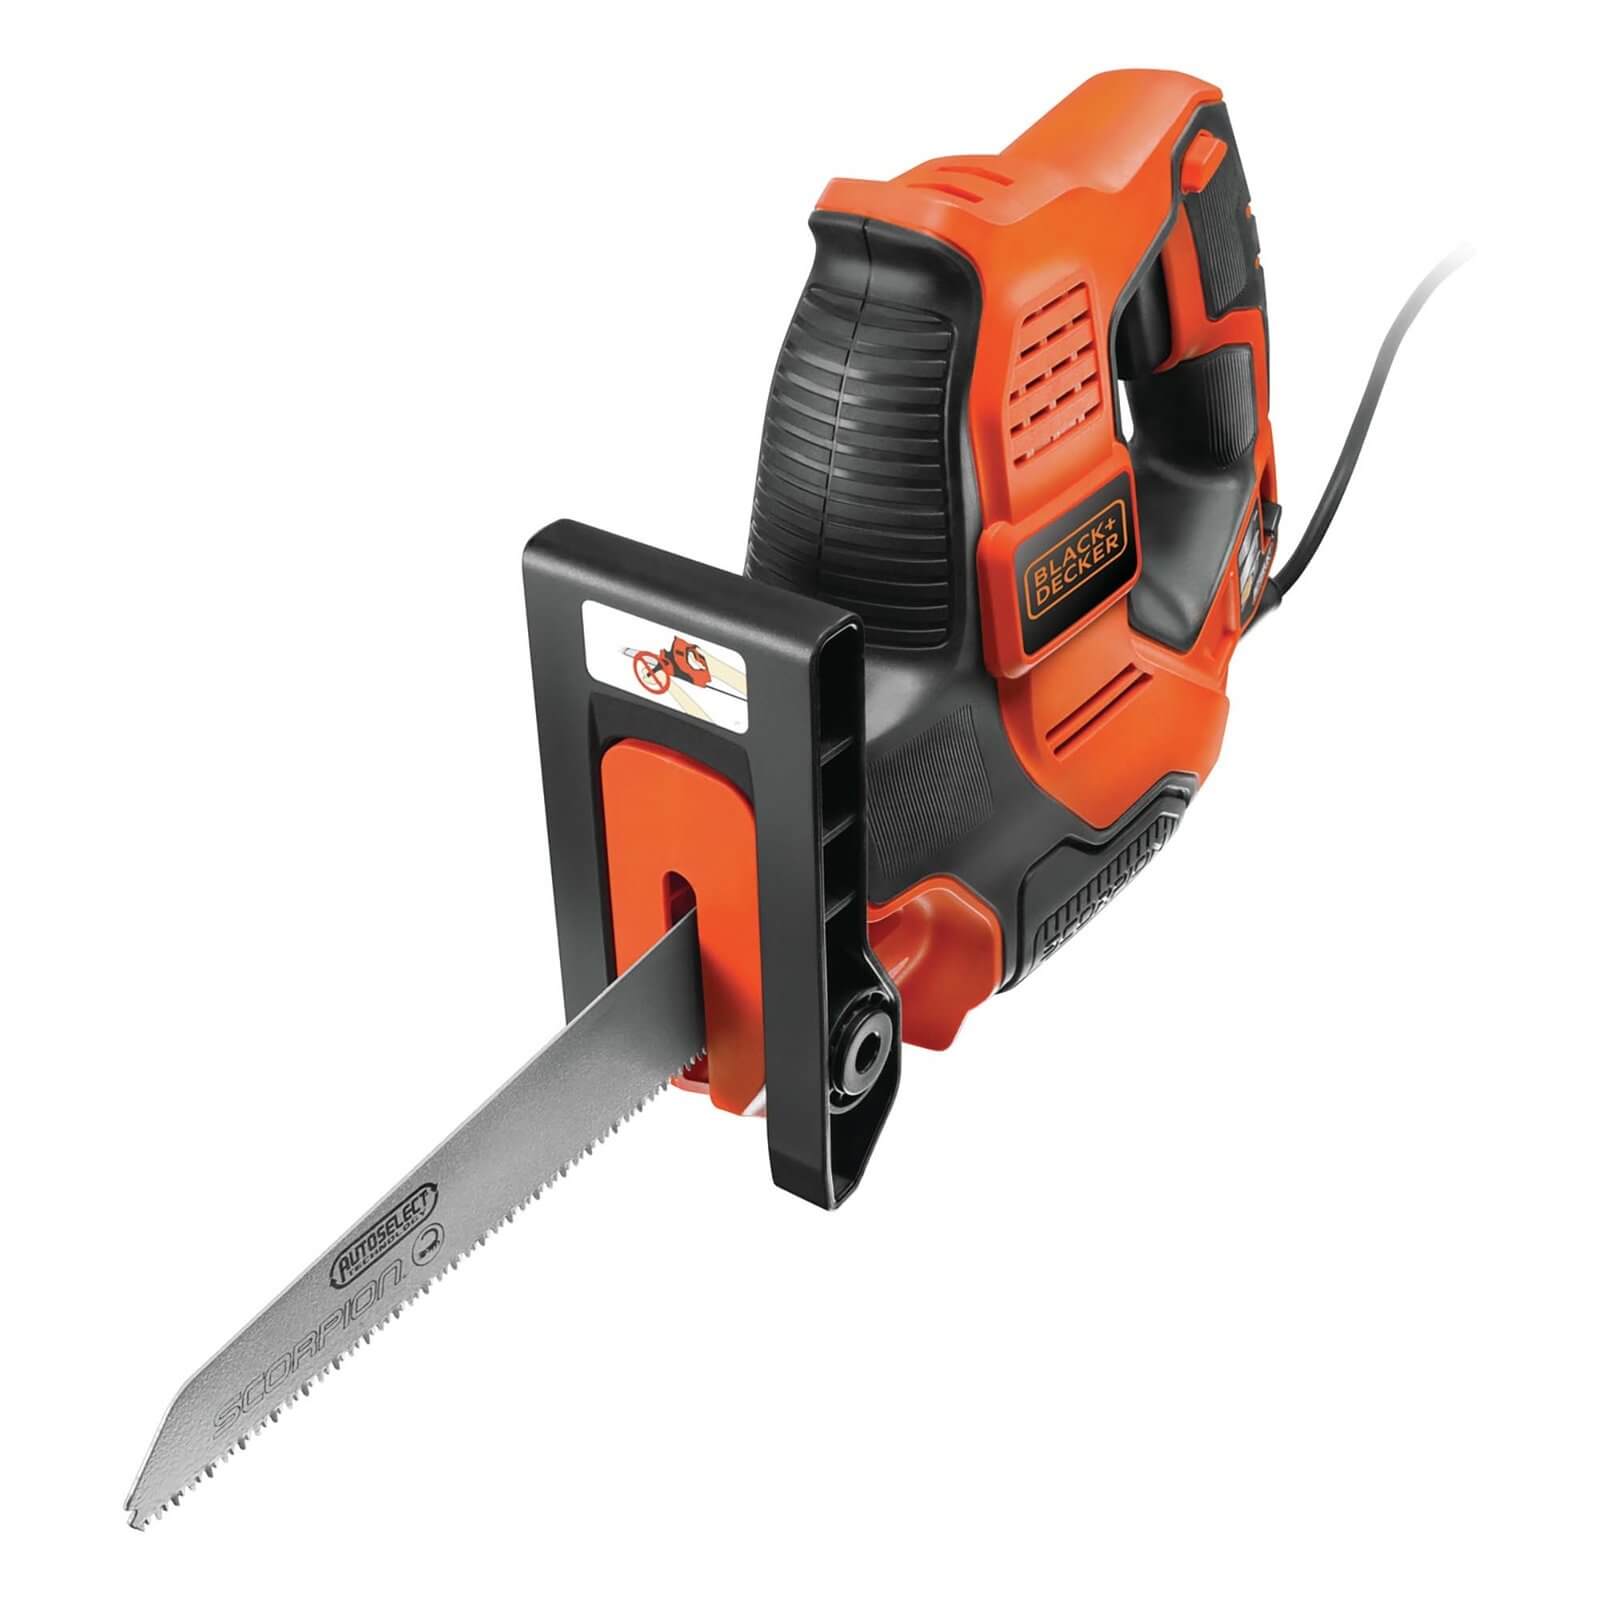 BLACK+DECKER Scorpion Auto-select 500W Powered Hand Saw with Blades and Kit Box (RS890K-GB)